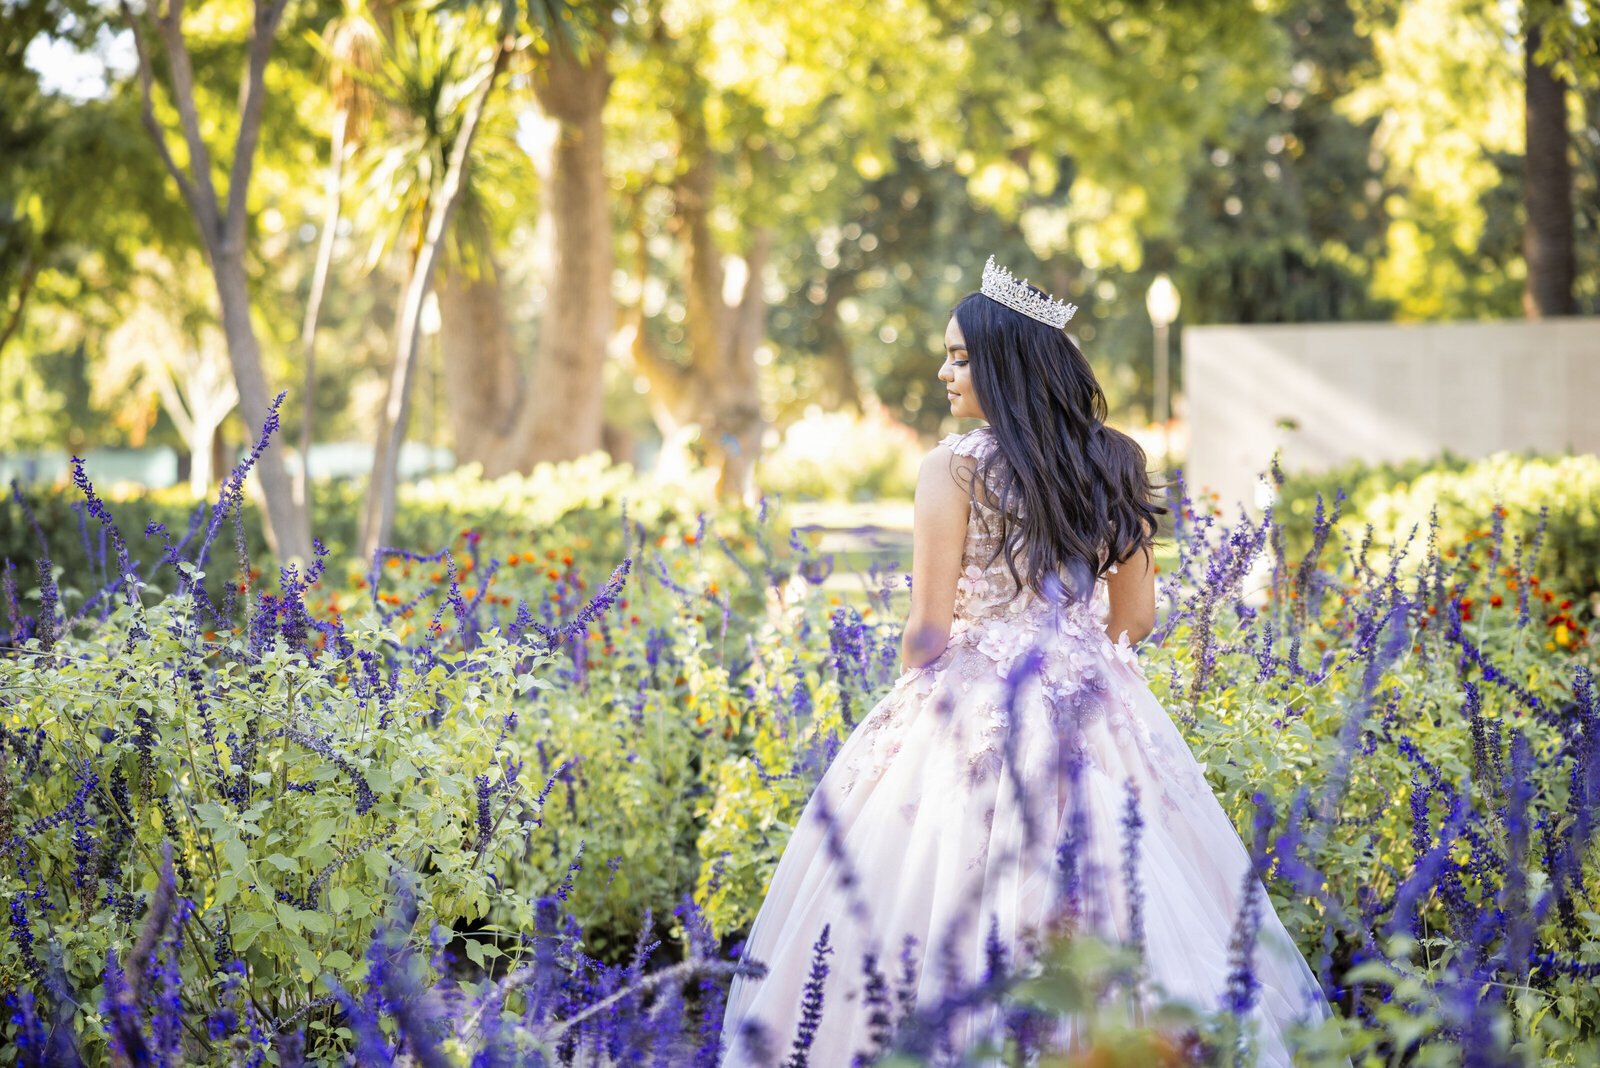 Young girl walks among flowers in bridal dress and crown.  Photo by sacramento wedding photographer philippe studio pro.